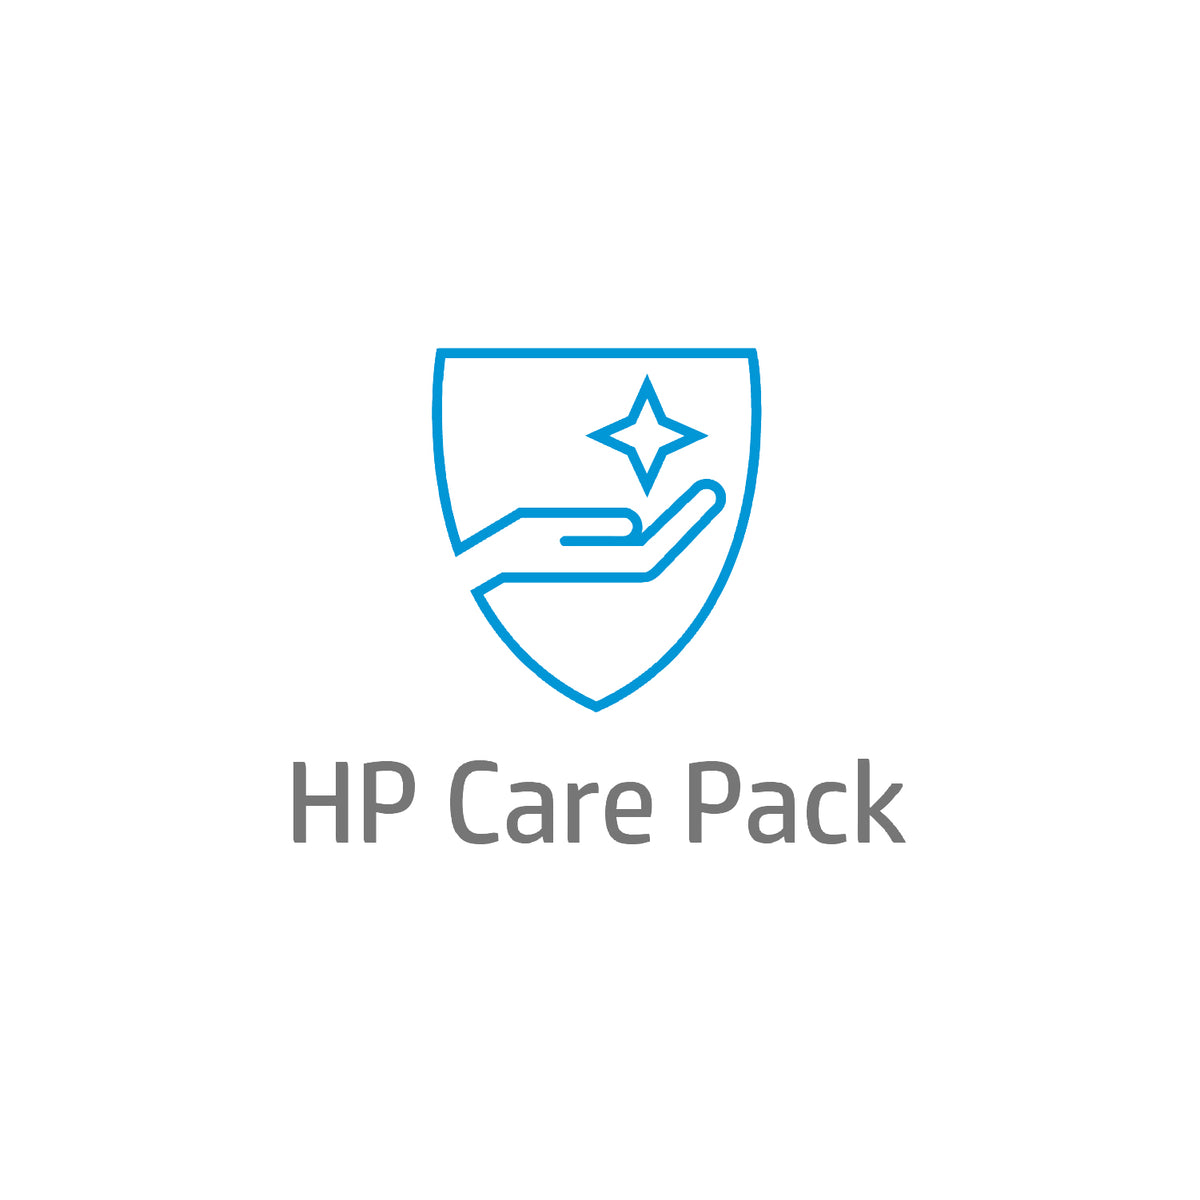 Electronic HP Care Pack 3 Business Day Onsite Hardware Support - Extended Service Agreement - parts and labor (for desktop with medium 2 years warranty) - 2 years - onsite - 9x5 - turnaround time: 3 business days - for Victus 15L by HP, Pavi